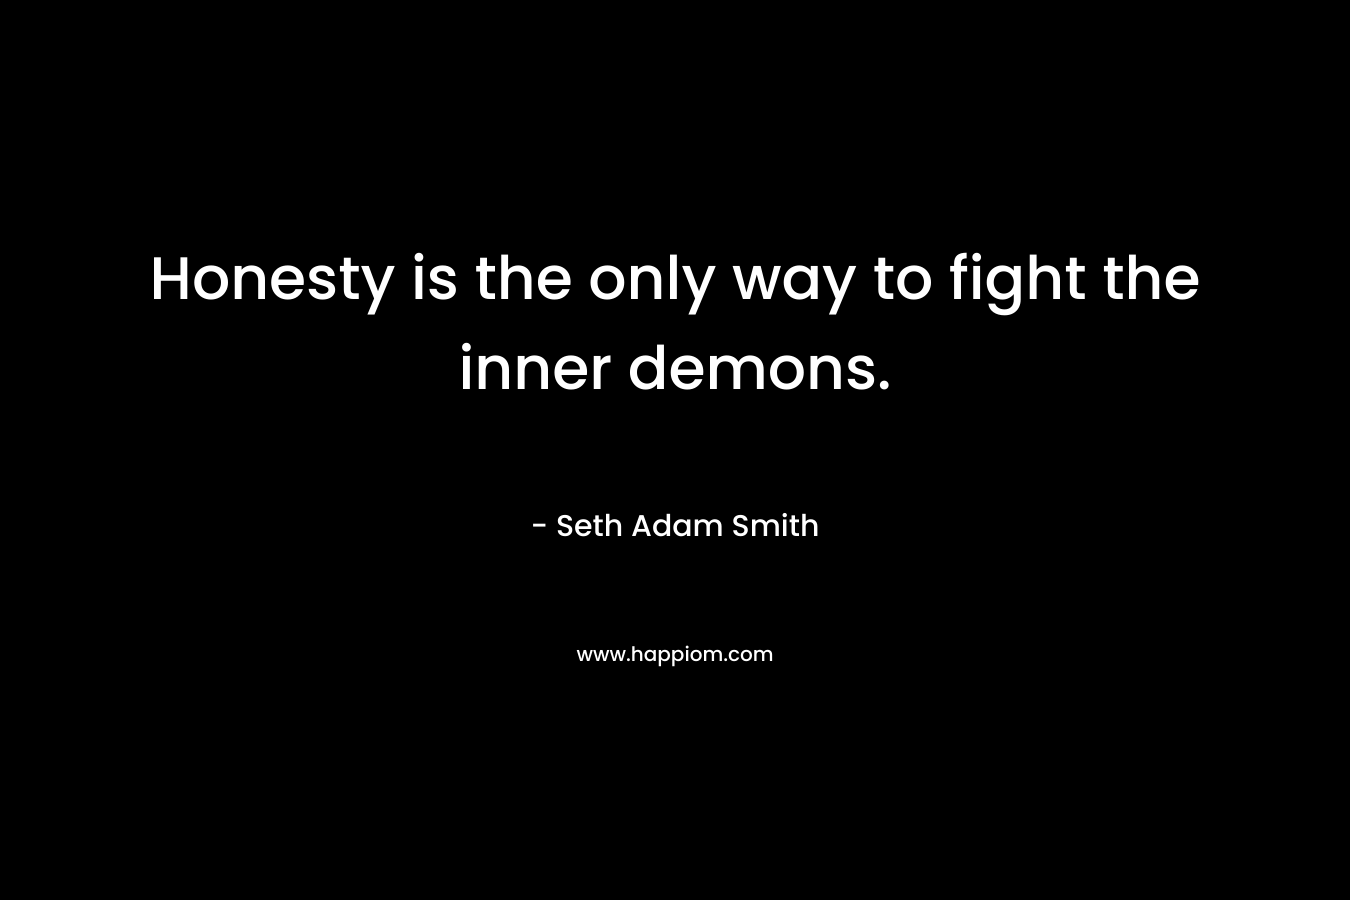 Honesty is the only way to fight the inner demons.